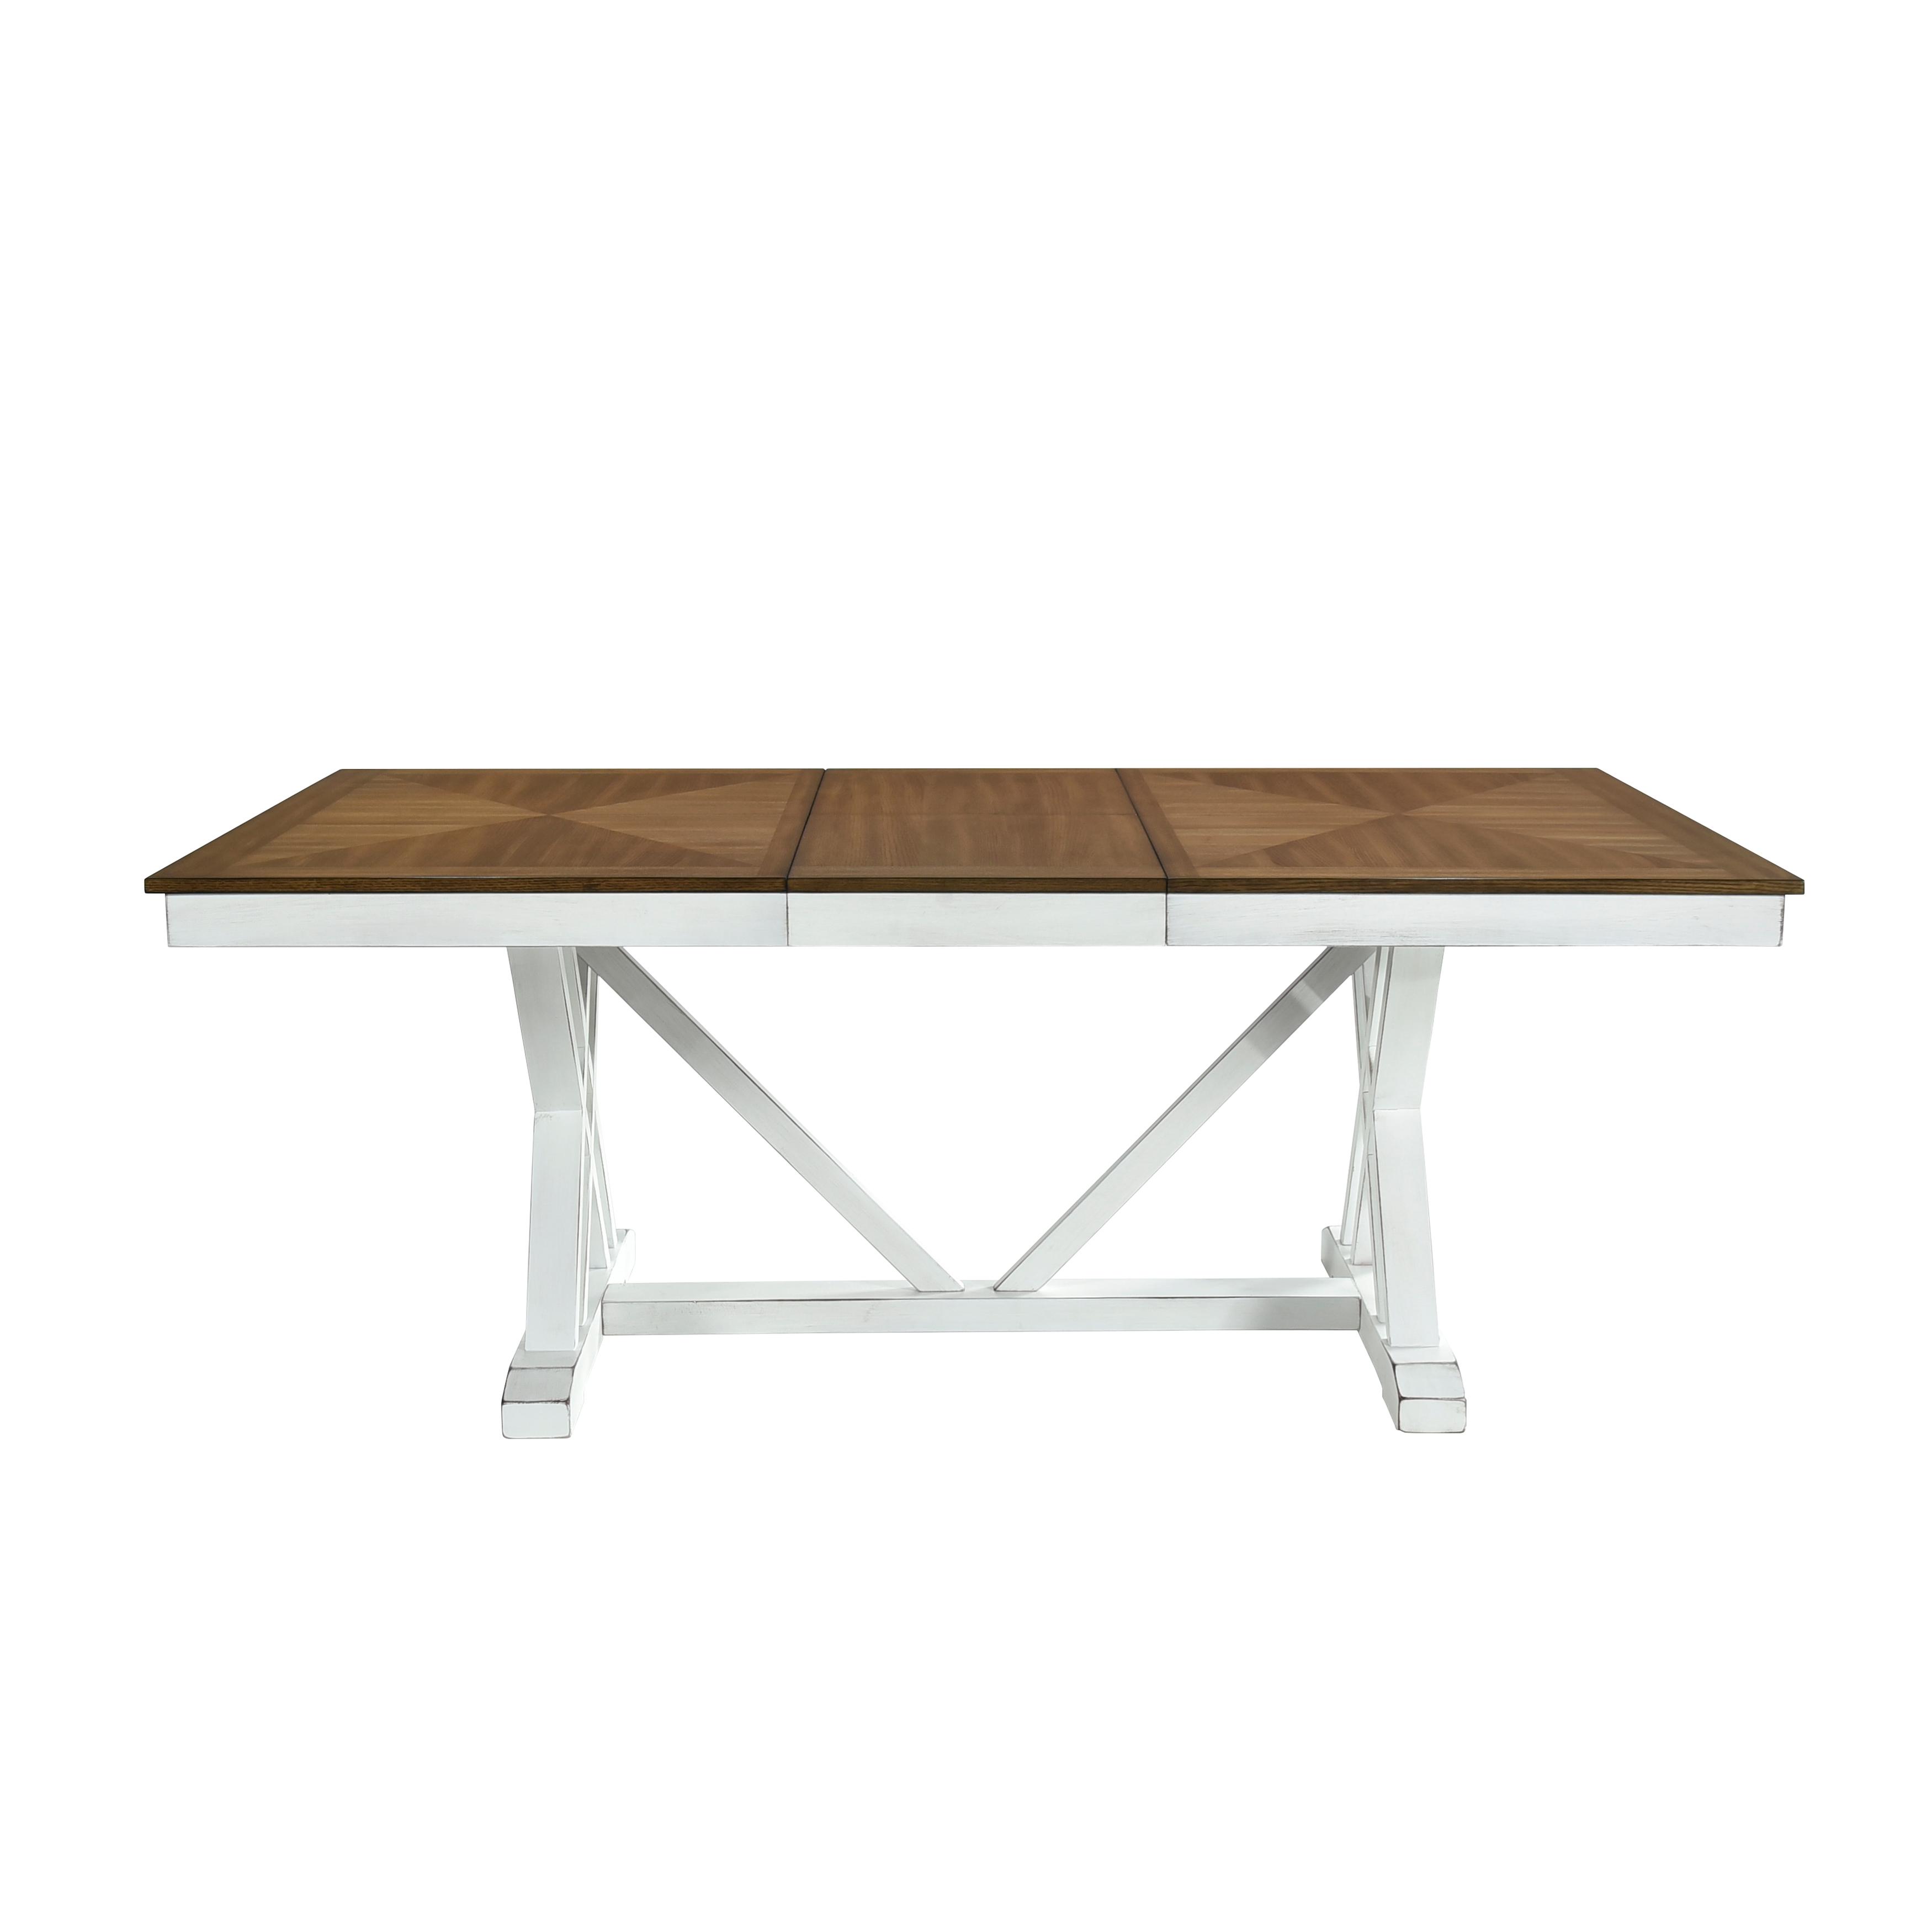 Traditional Dining Table Brunson Dining Table 5865-77-T 5865-77-T in Oak, Khaki, White 